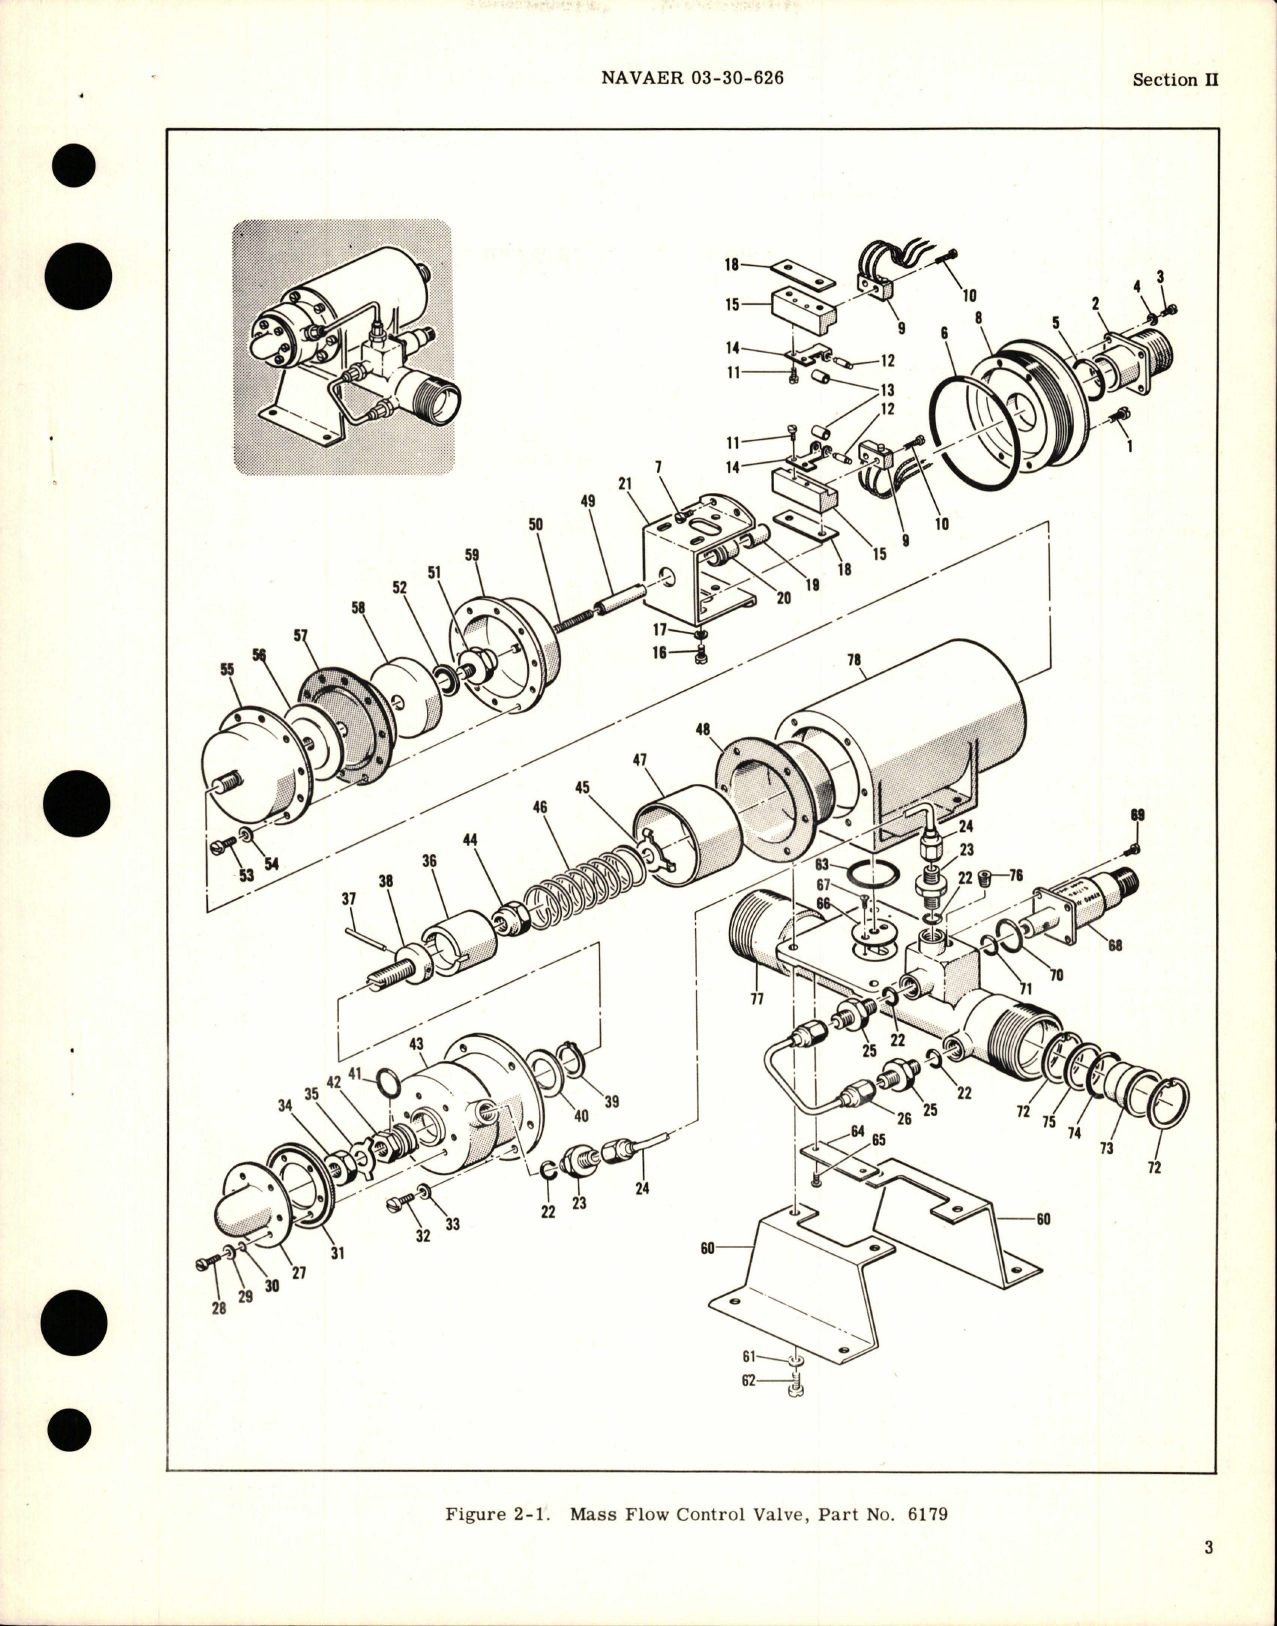 Sample page 5 from AirCorps Library document: Overhaul Instructions for Mass Flow Control Valve - Part 6179